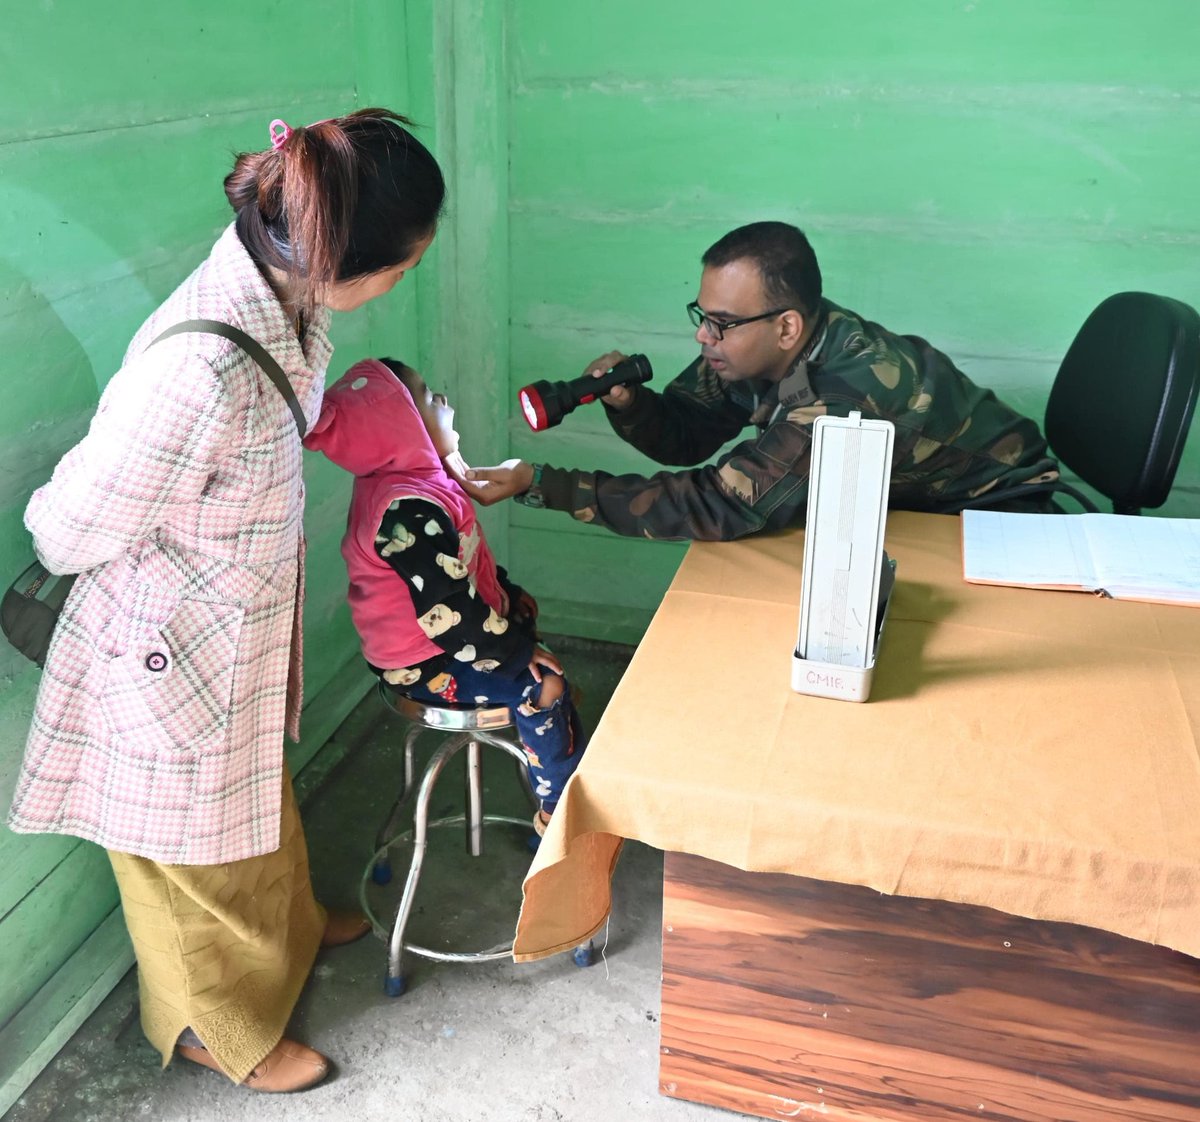 The recently upgraded amenities at Public Health Centre (PHC), Taksing, #ArunachalPradesh under #OperationSadbhavana of #IndianArmy facilitated conduct of a Medical Camp by troops of #SpearCorps. #progressingJK#NashaMuktJK #VeeronKiBhoomi #BadltaJK #Agnipath #Agniveer